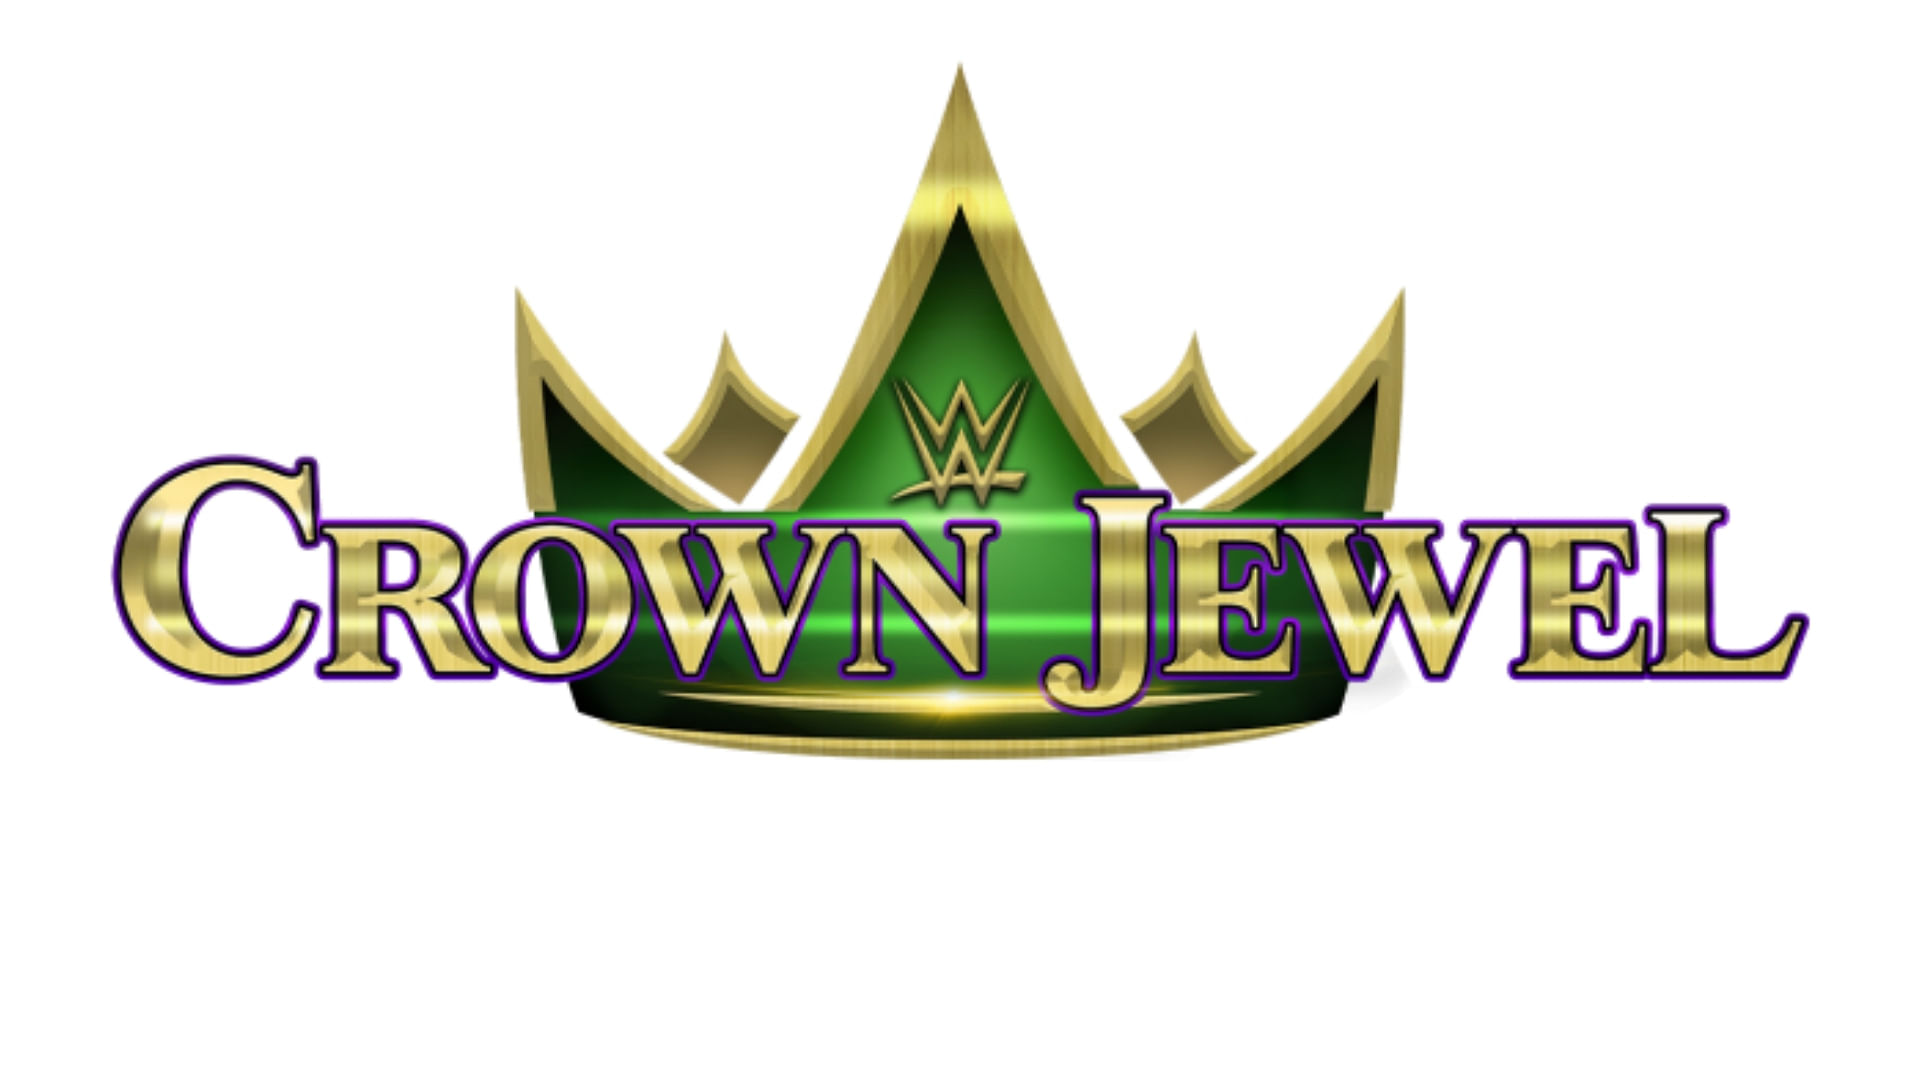 Crown Jewel is WWE’s fourth pay-per-view event in Saudi Arabia.